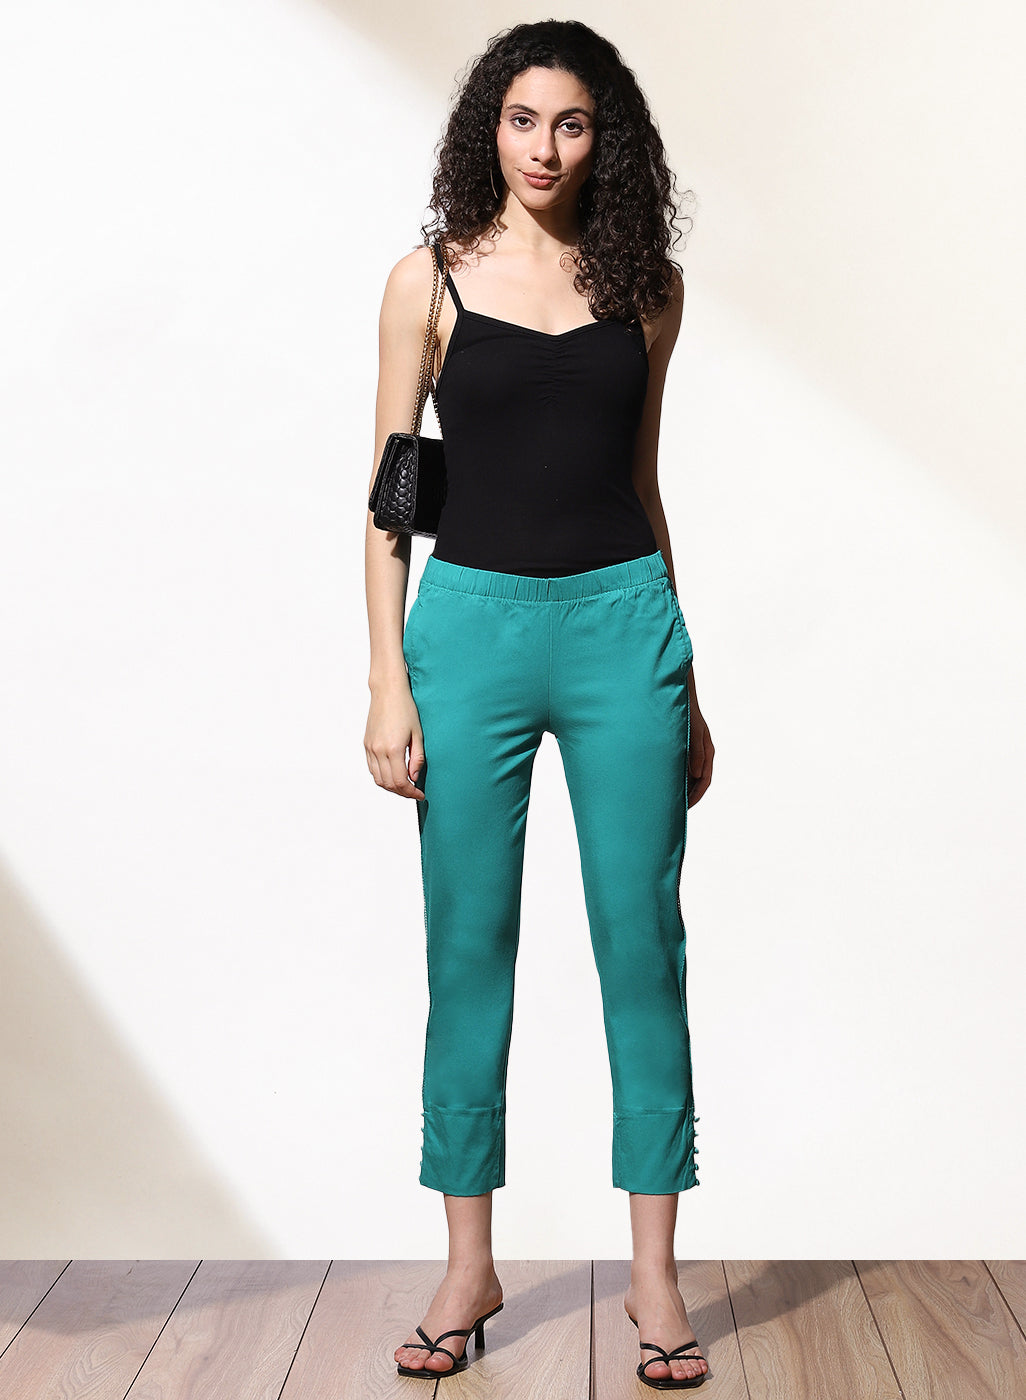 Turquoise Capri In Solid Color